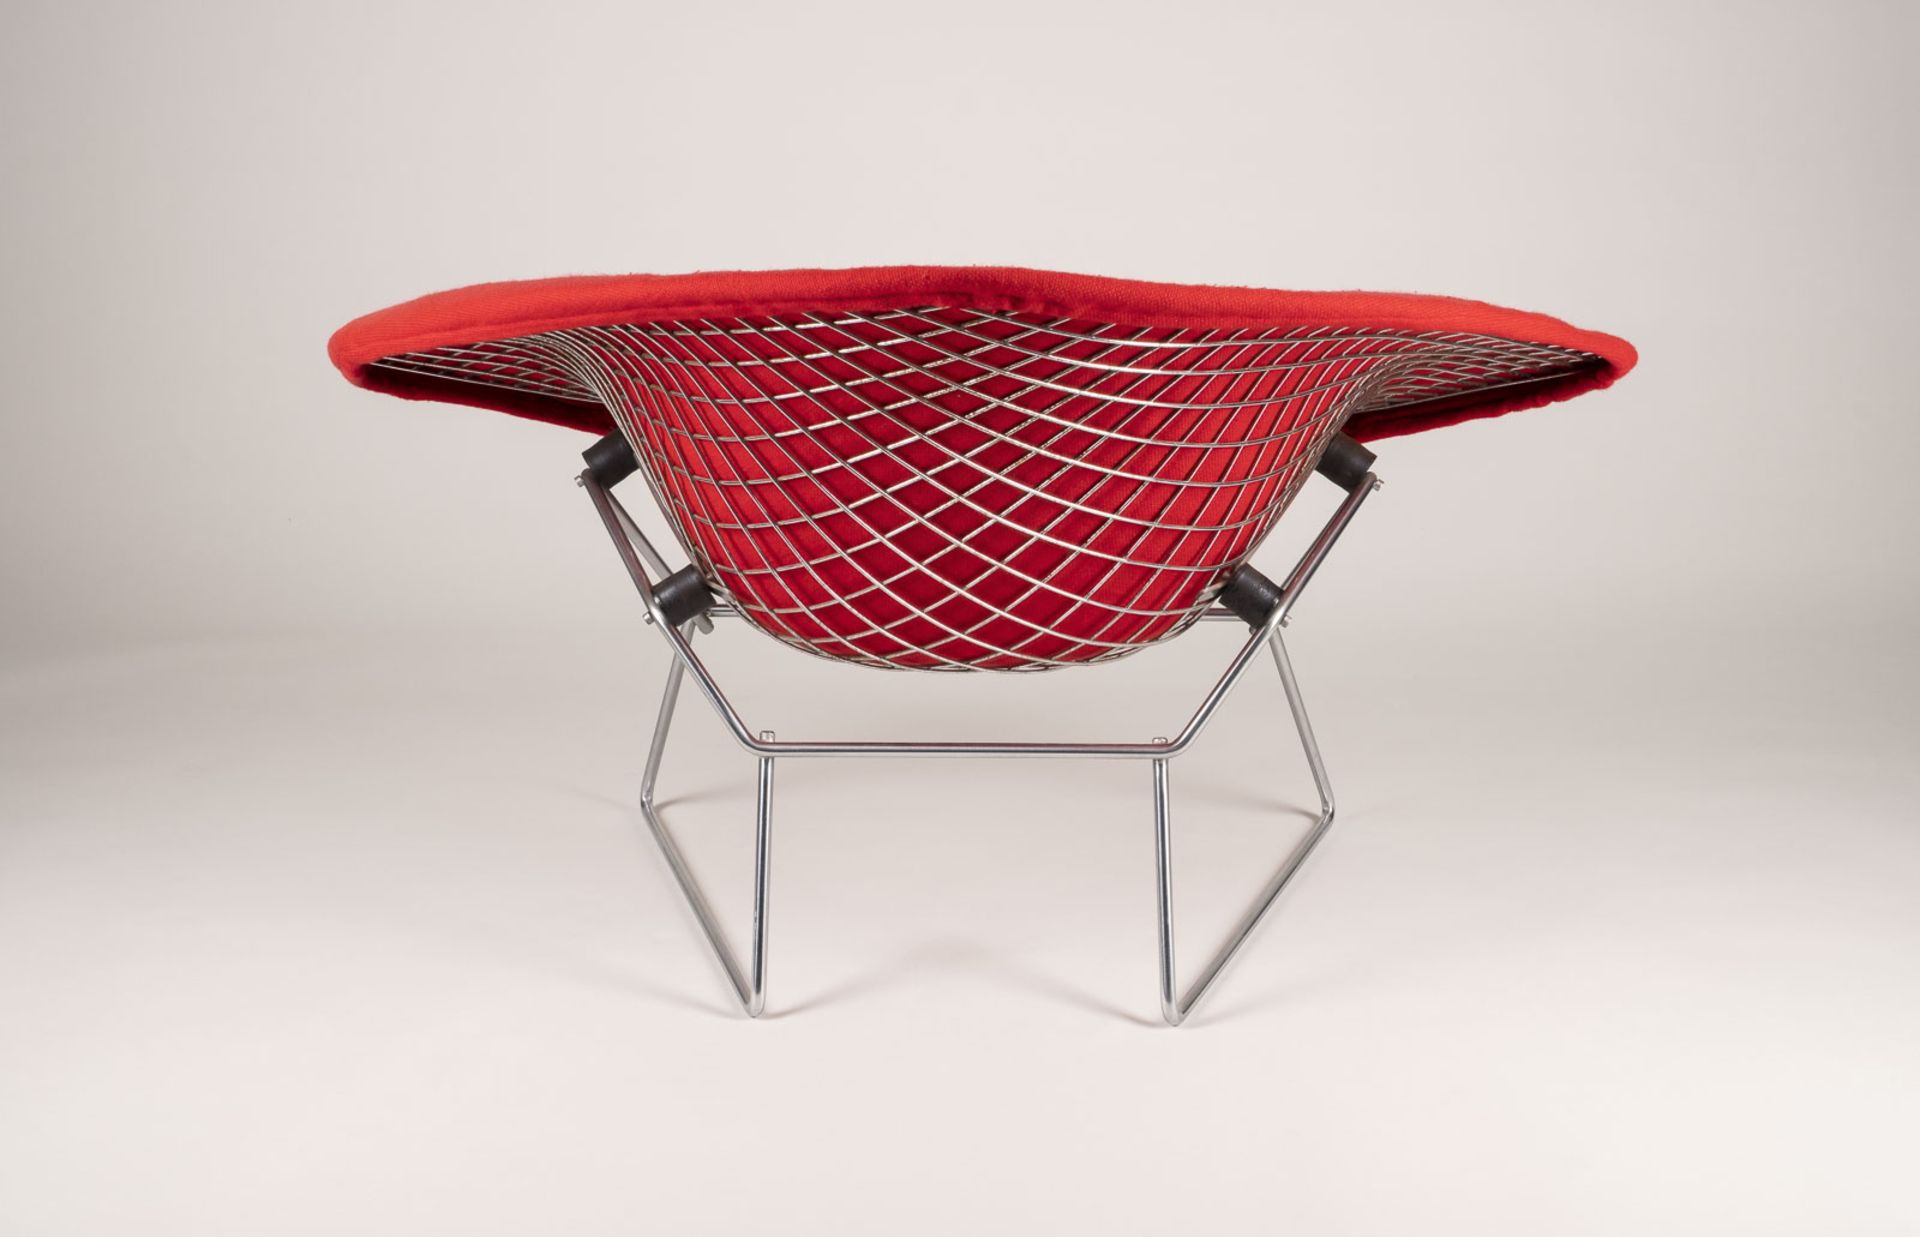 Sessel Modell 422 'large diamond chair' - Image 2 of 2